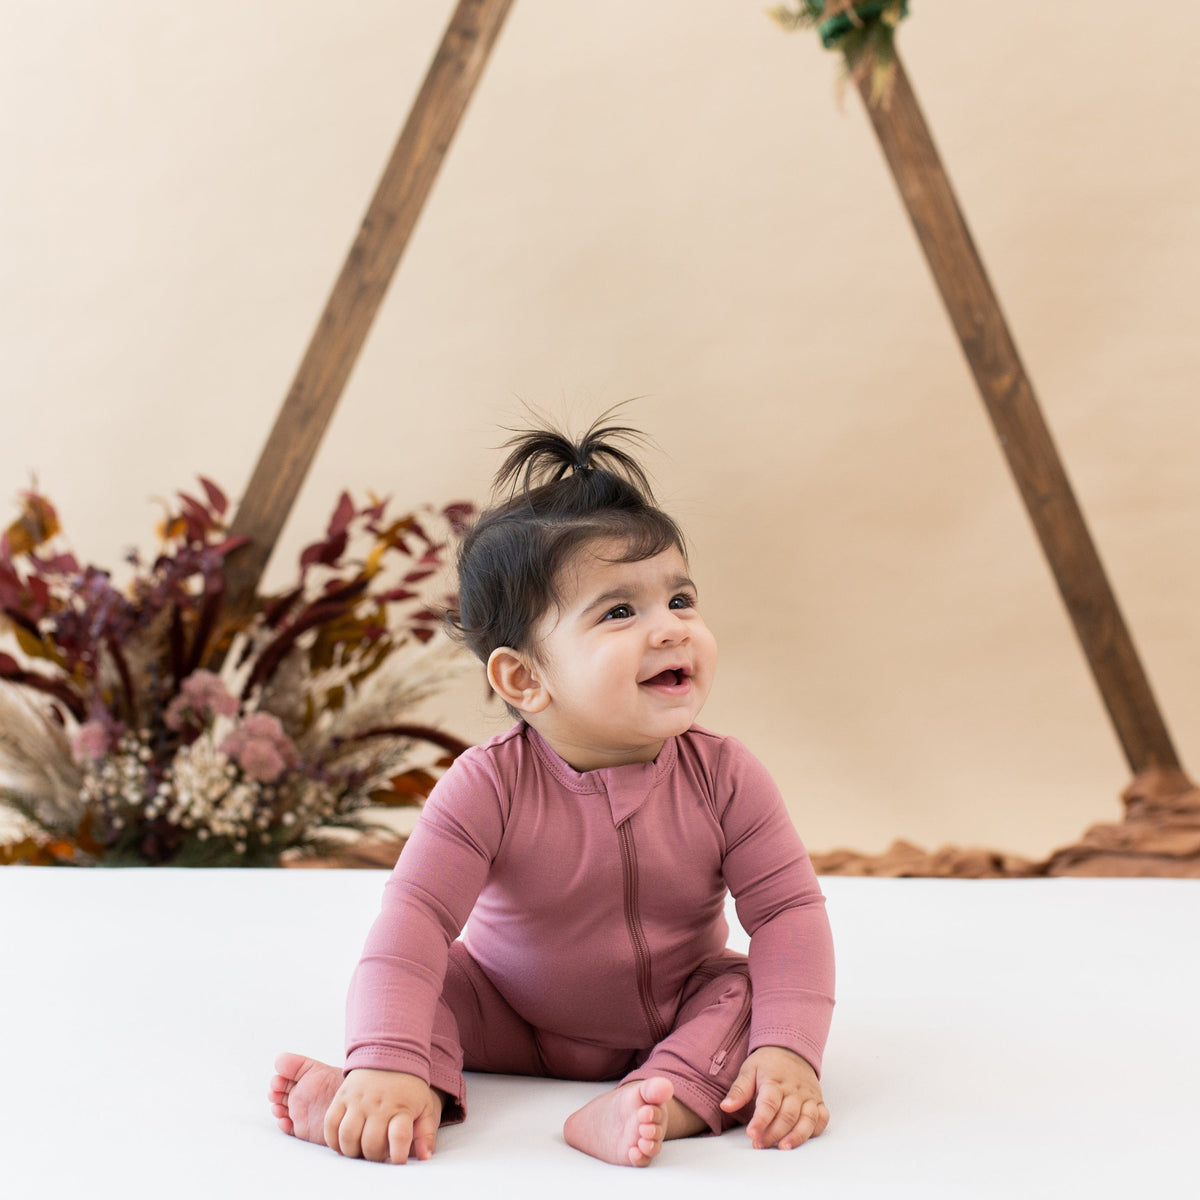 Kyte Baby Zippered Rompers Zippered Romper in Dusty Rose